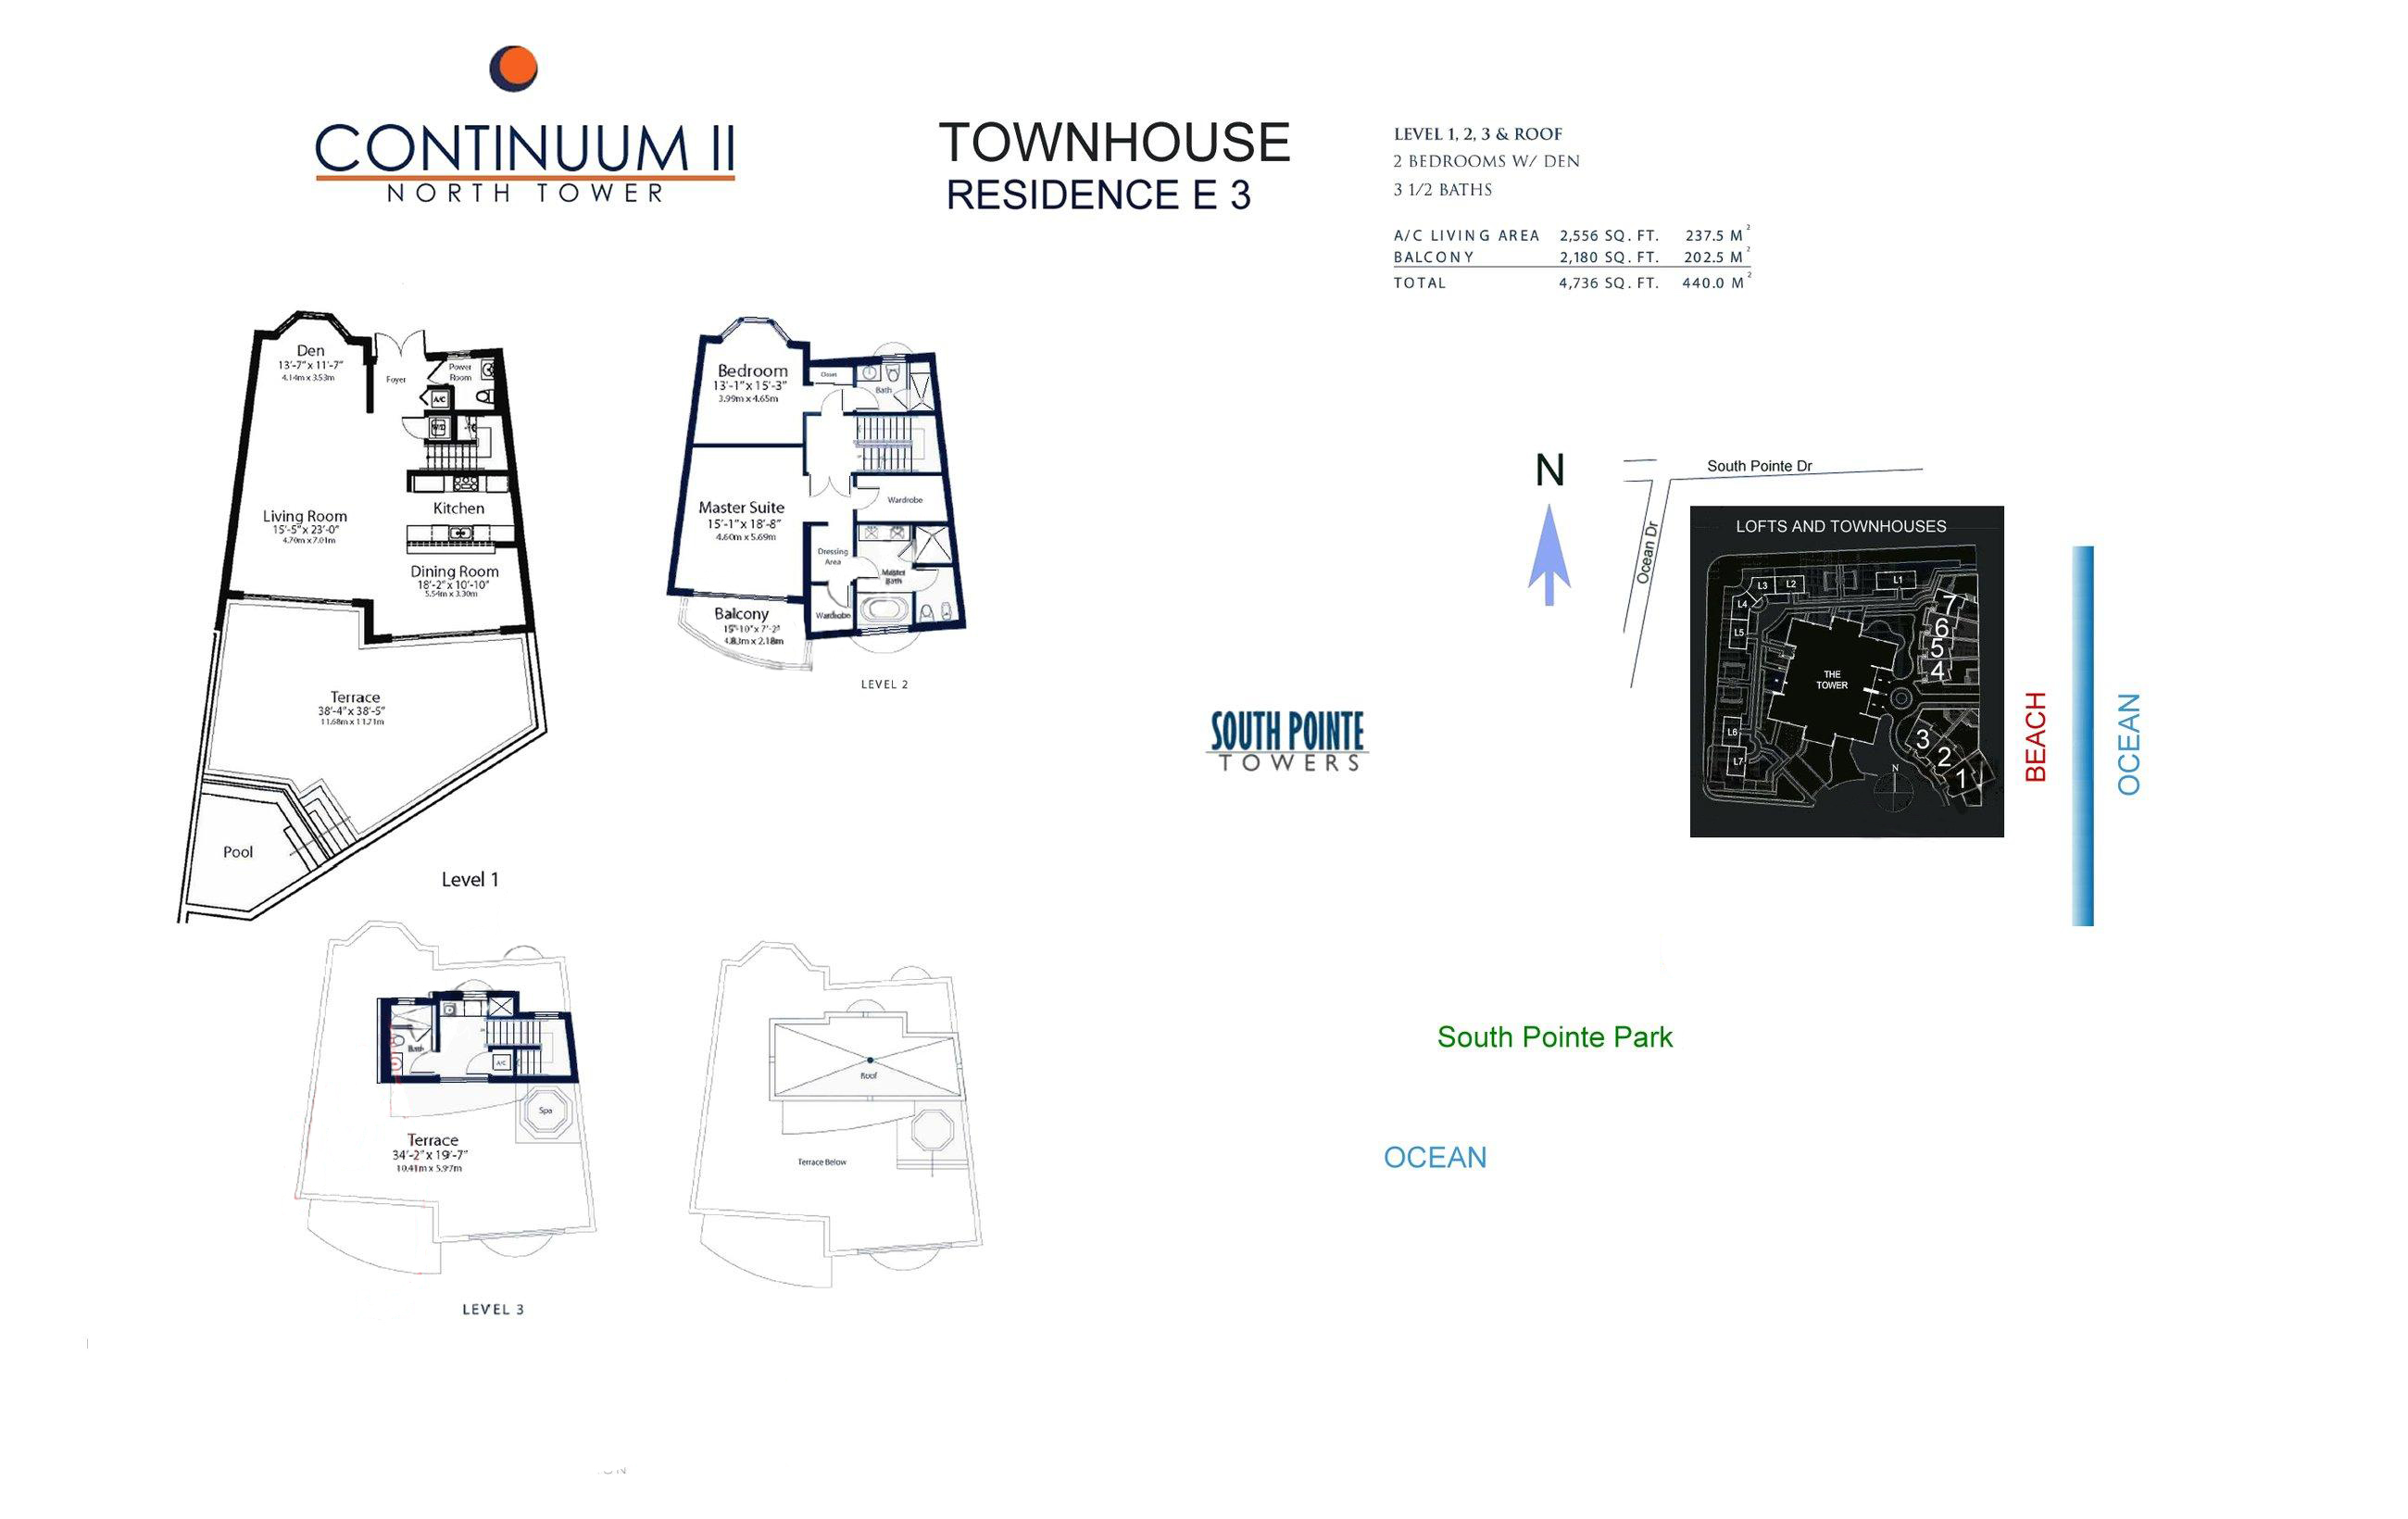 Continuum North Tower Townhouse Residence E3